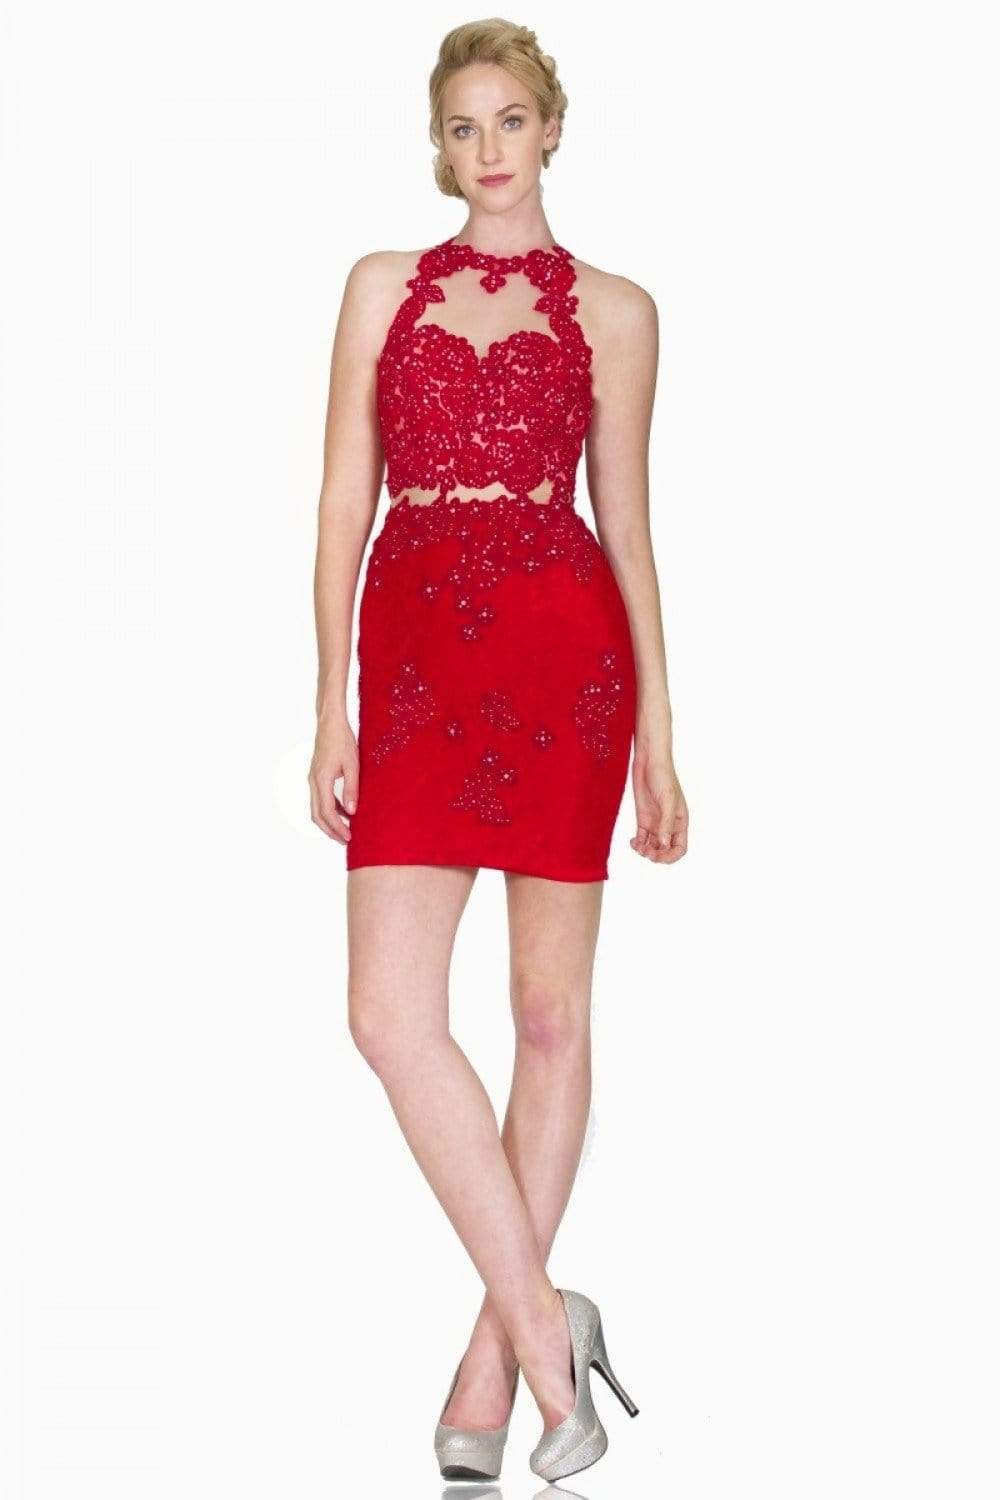 Cinderella Divine - 1586S Lace Appliqued Illusion Midriff Sheath Short Formal Dress Special Occasion Dress 2 / Red